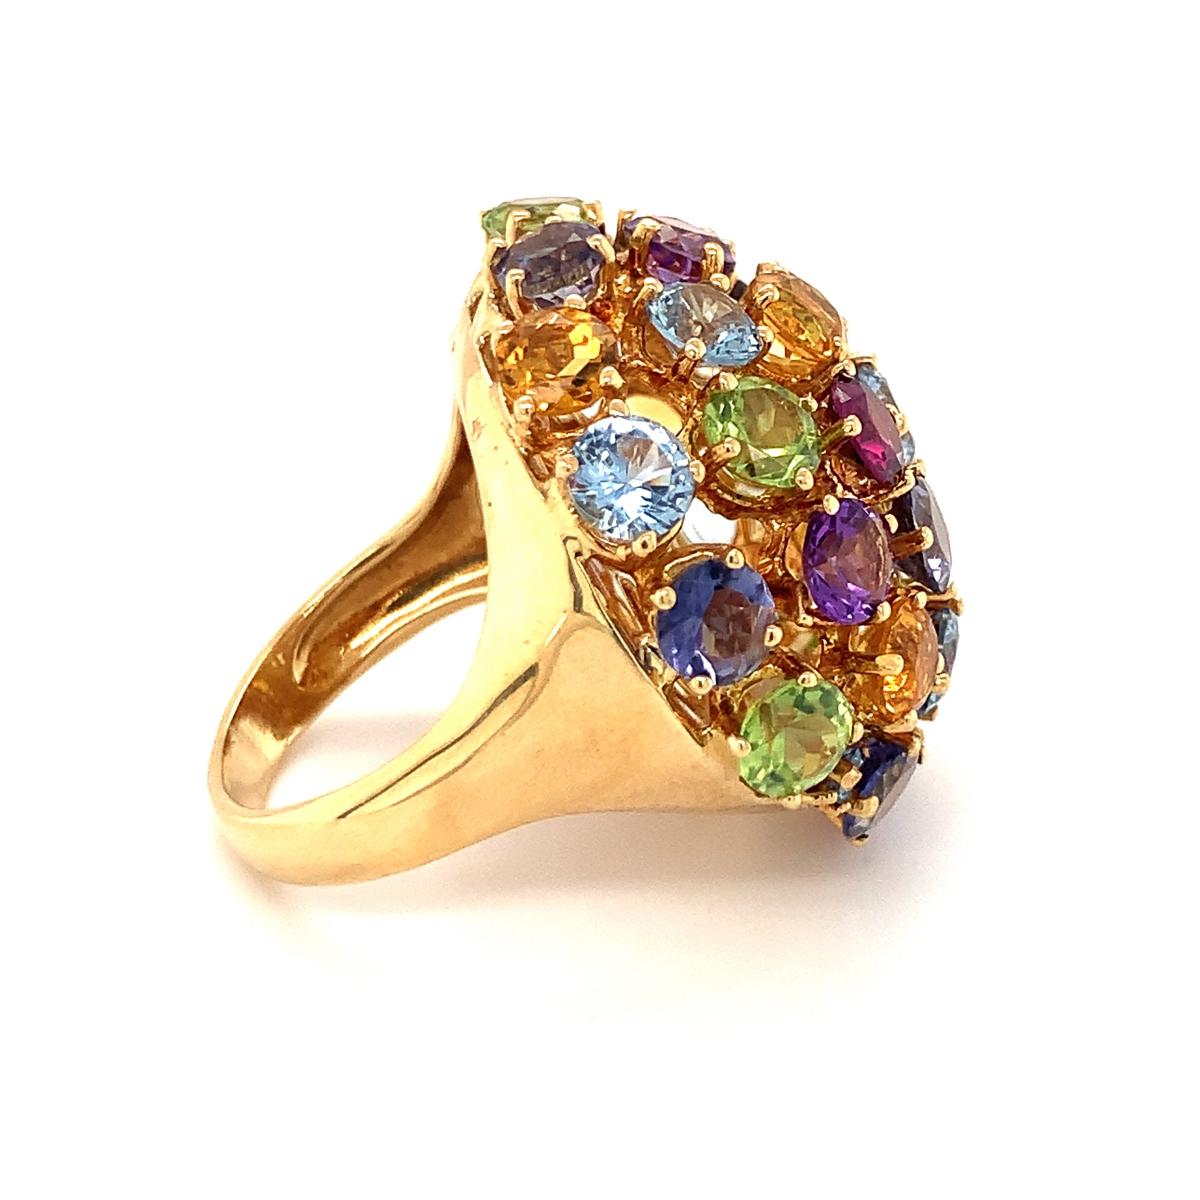 Women's Multi-Gem Bombe Ring in 18K Yellow Gold, circa 1960s For Sale